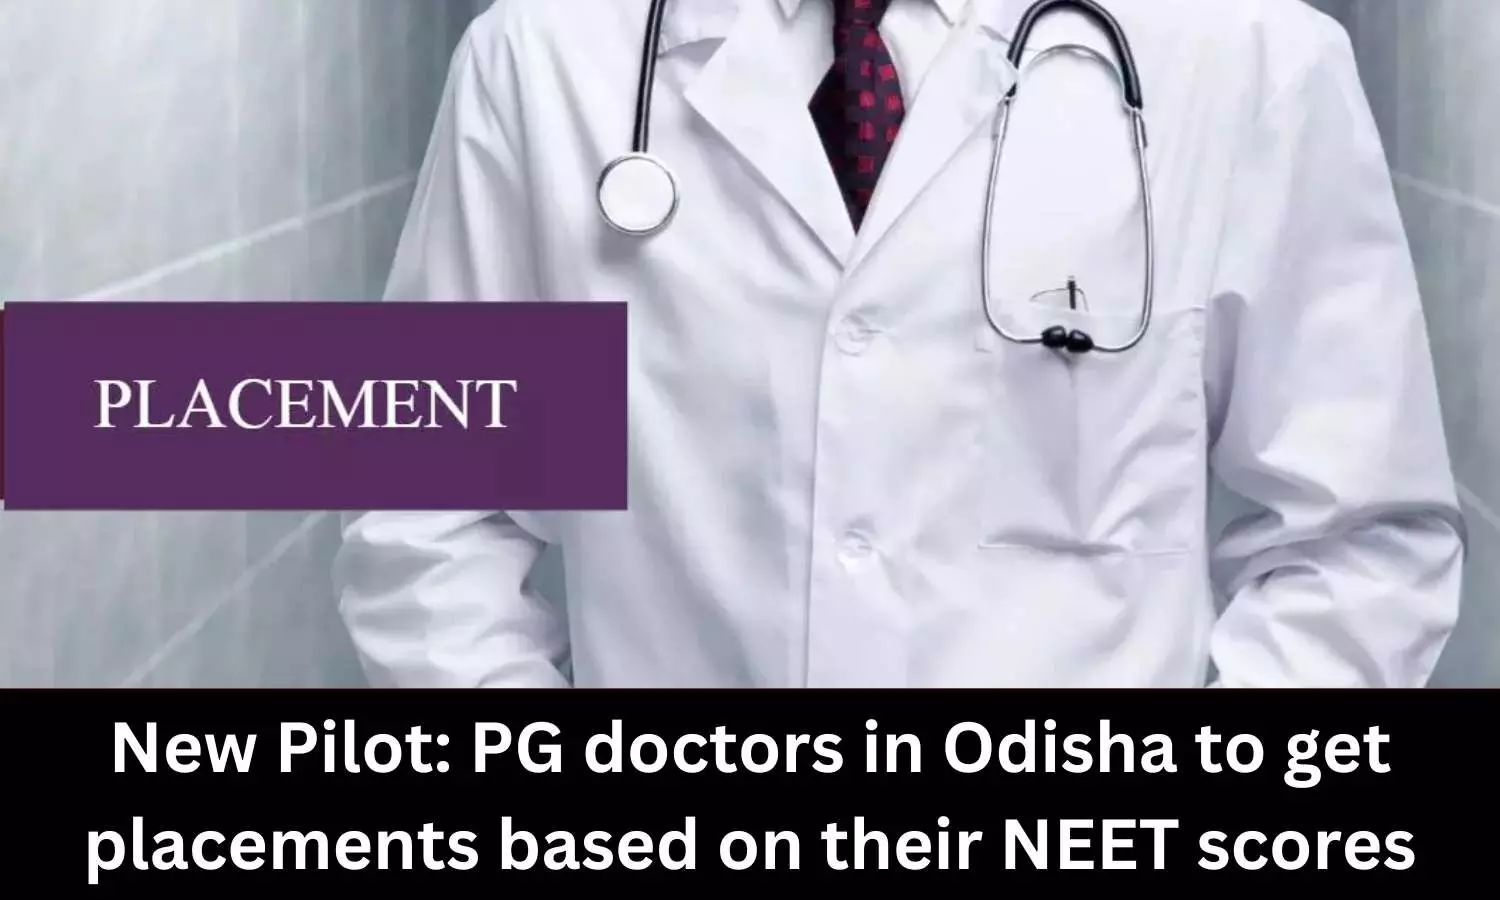 New Pilot: PG doctors in Odisha to get placements based on their NEET scores